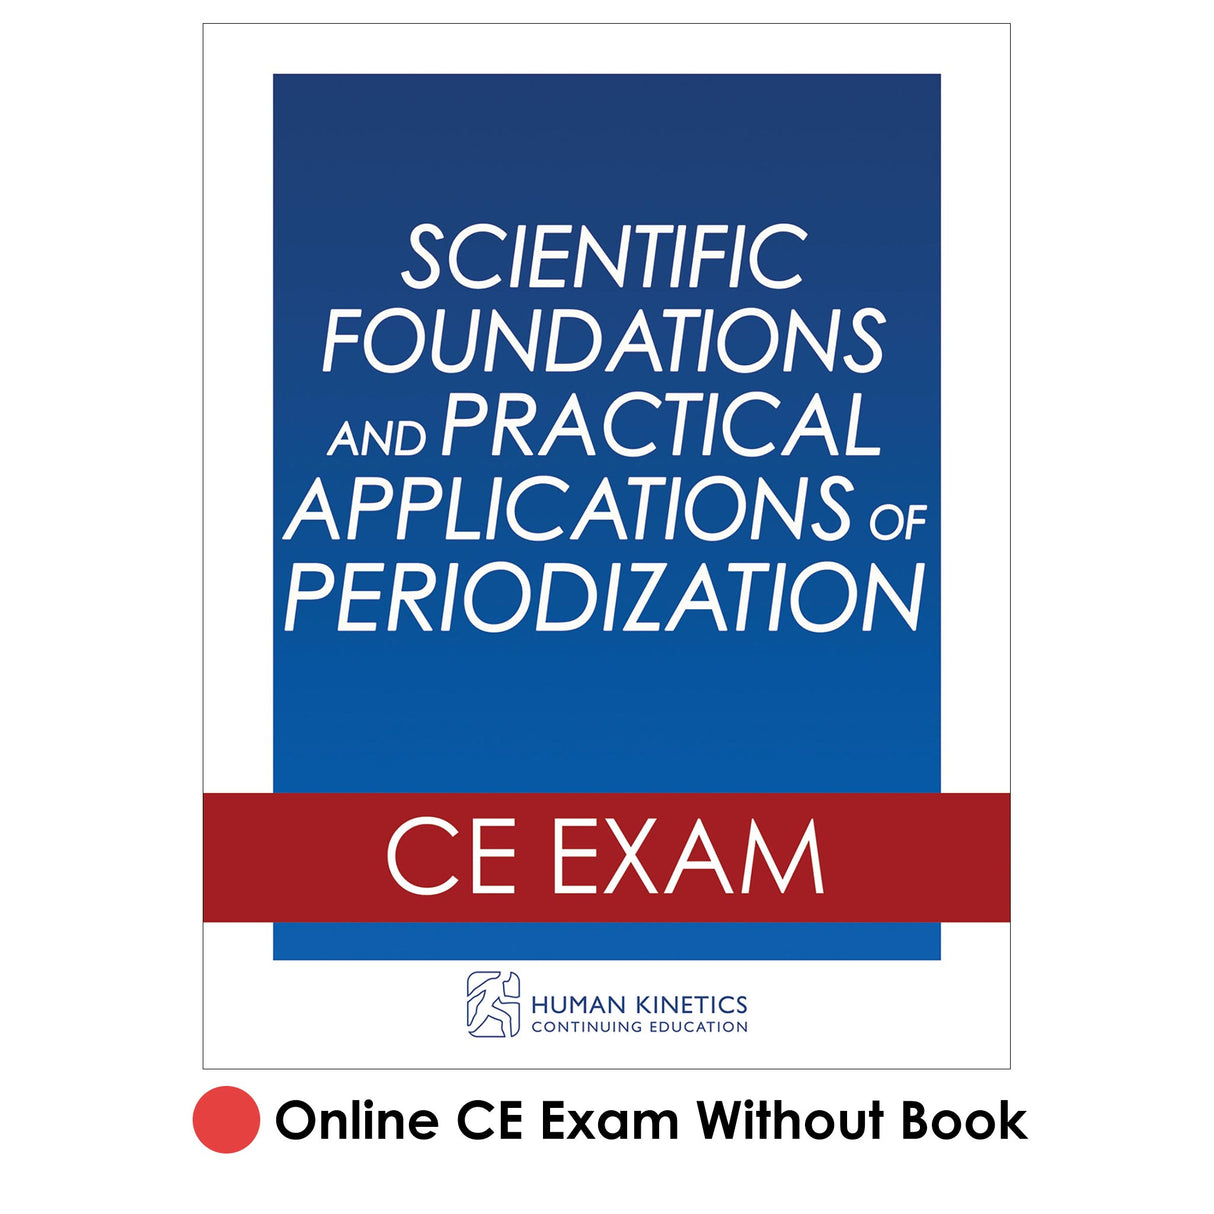 Scientific Foundations and Practical Applications of Periodization Online CE Exam Without Book